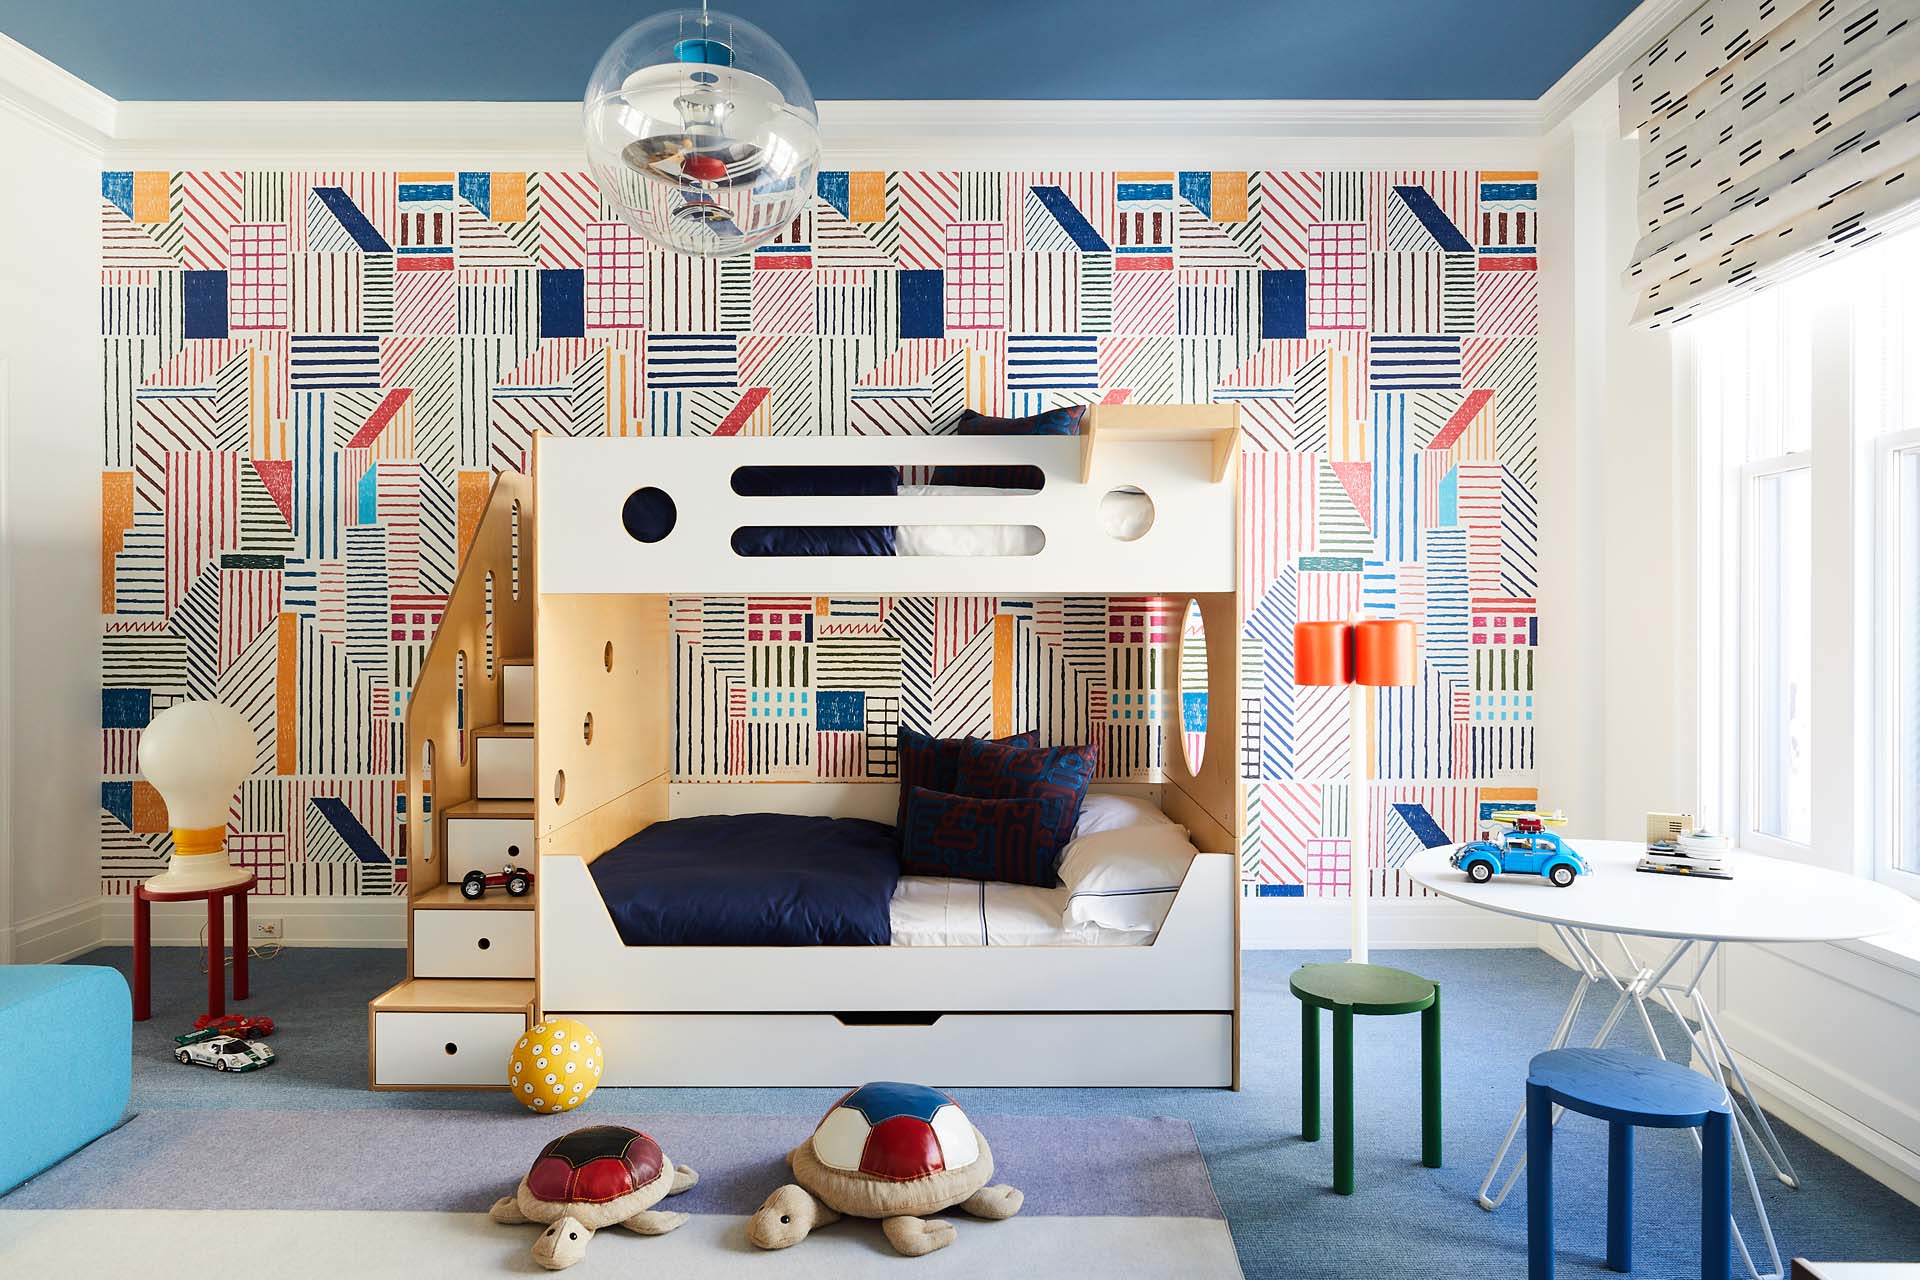 A bunk bed in a room